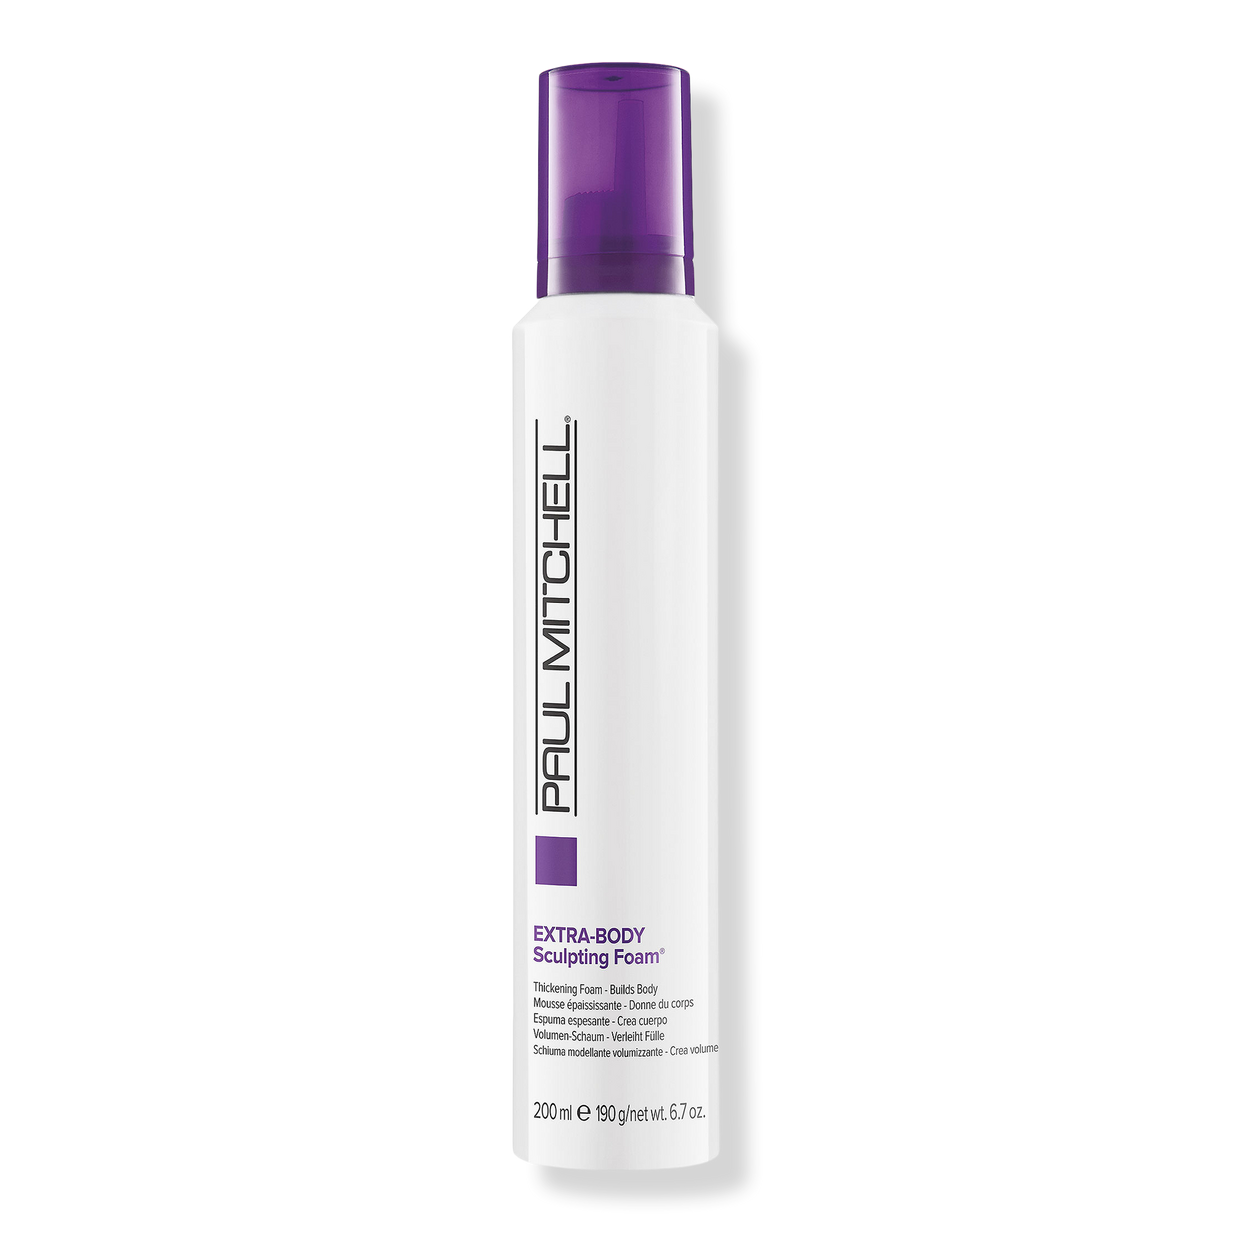 Paul Mitchell Extra Body Sculpting Foam Thickening-Builds Body 6.7 oz  Sealed